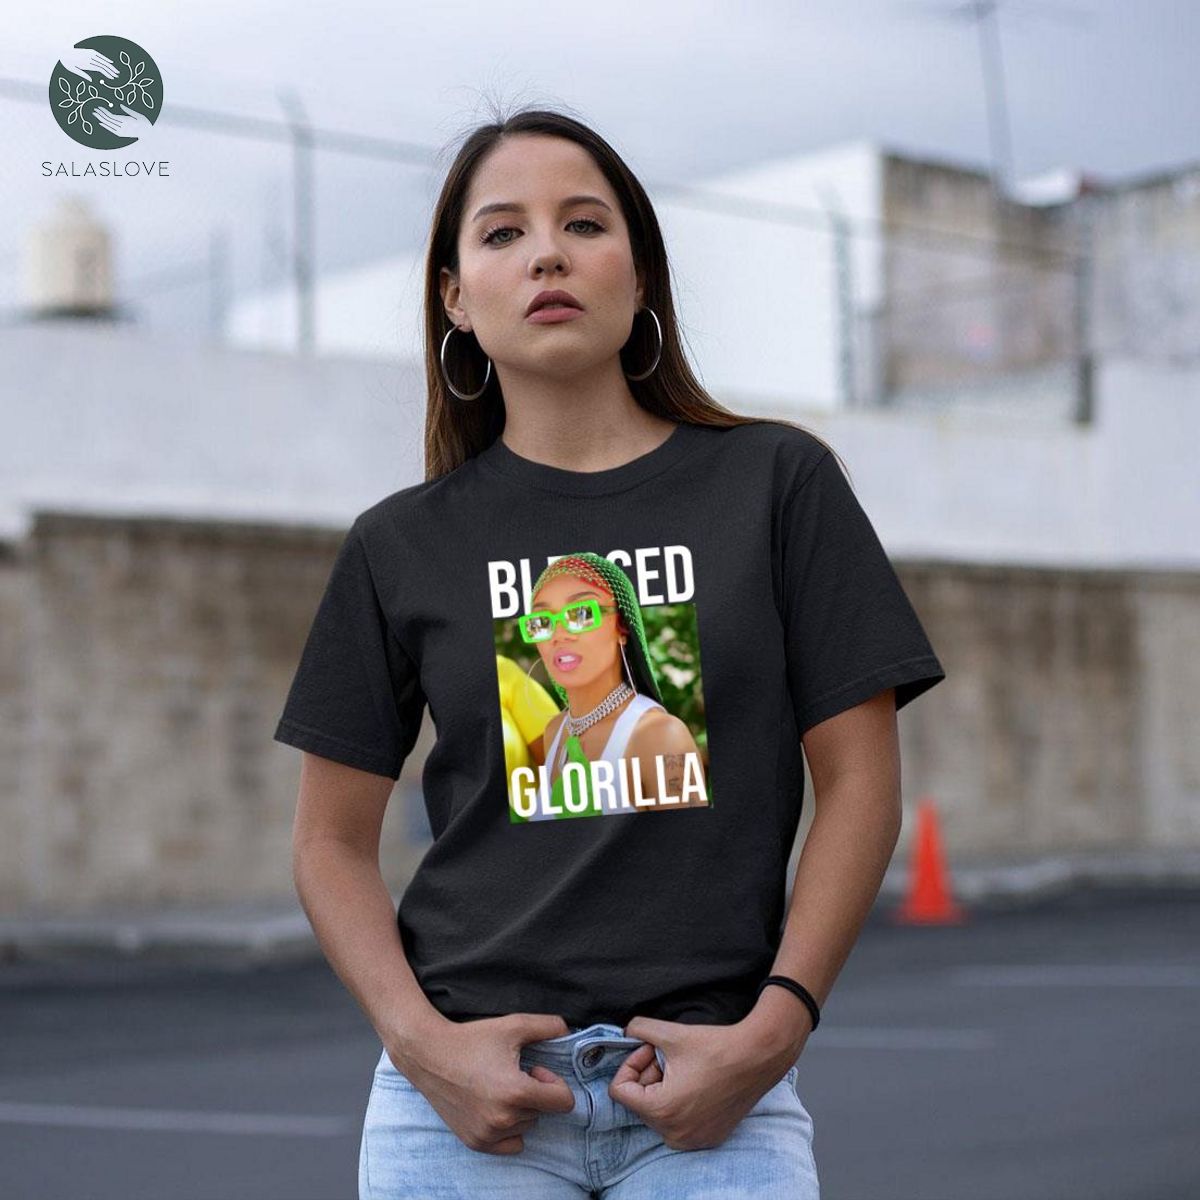 GloRilla - Blessed Music Shirt For Fan